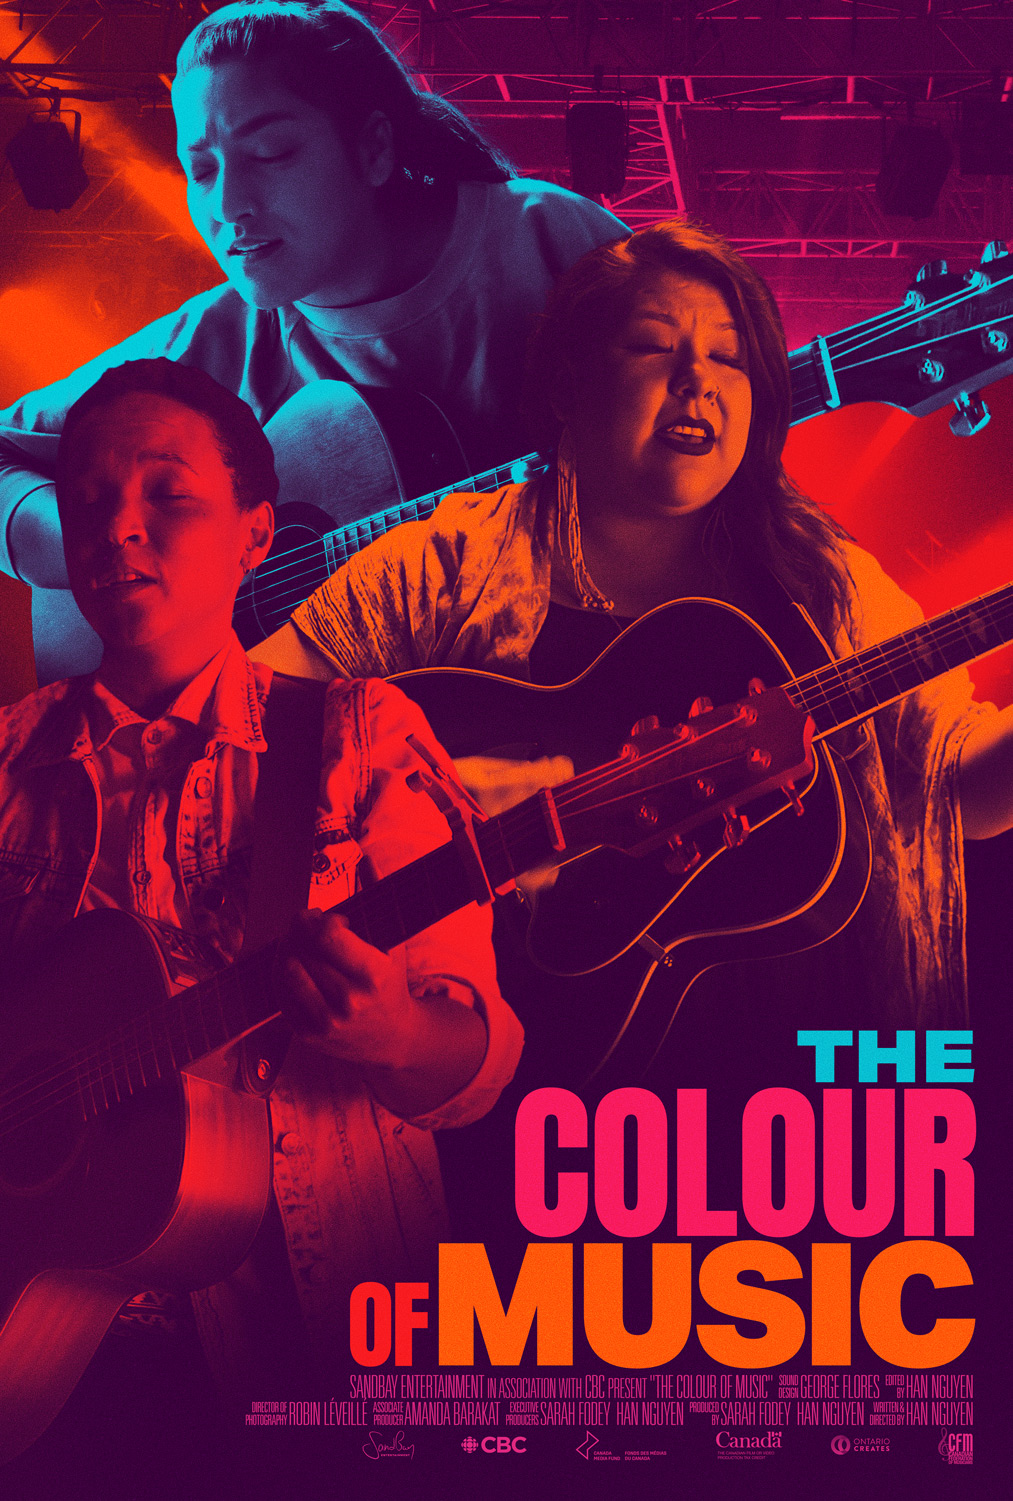 The Colour of Music movie poster